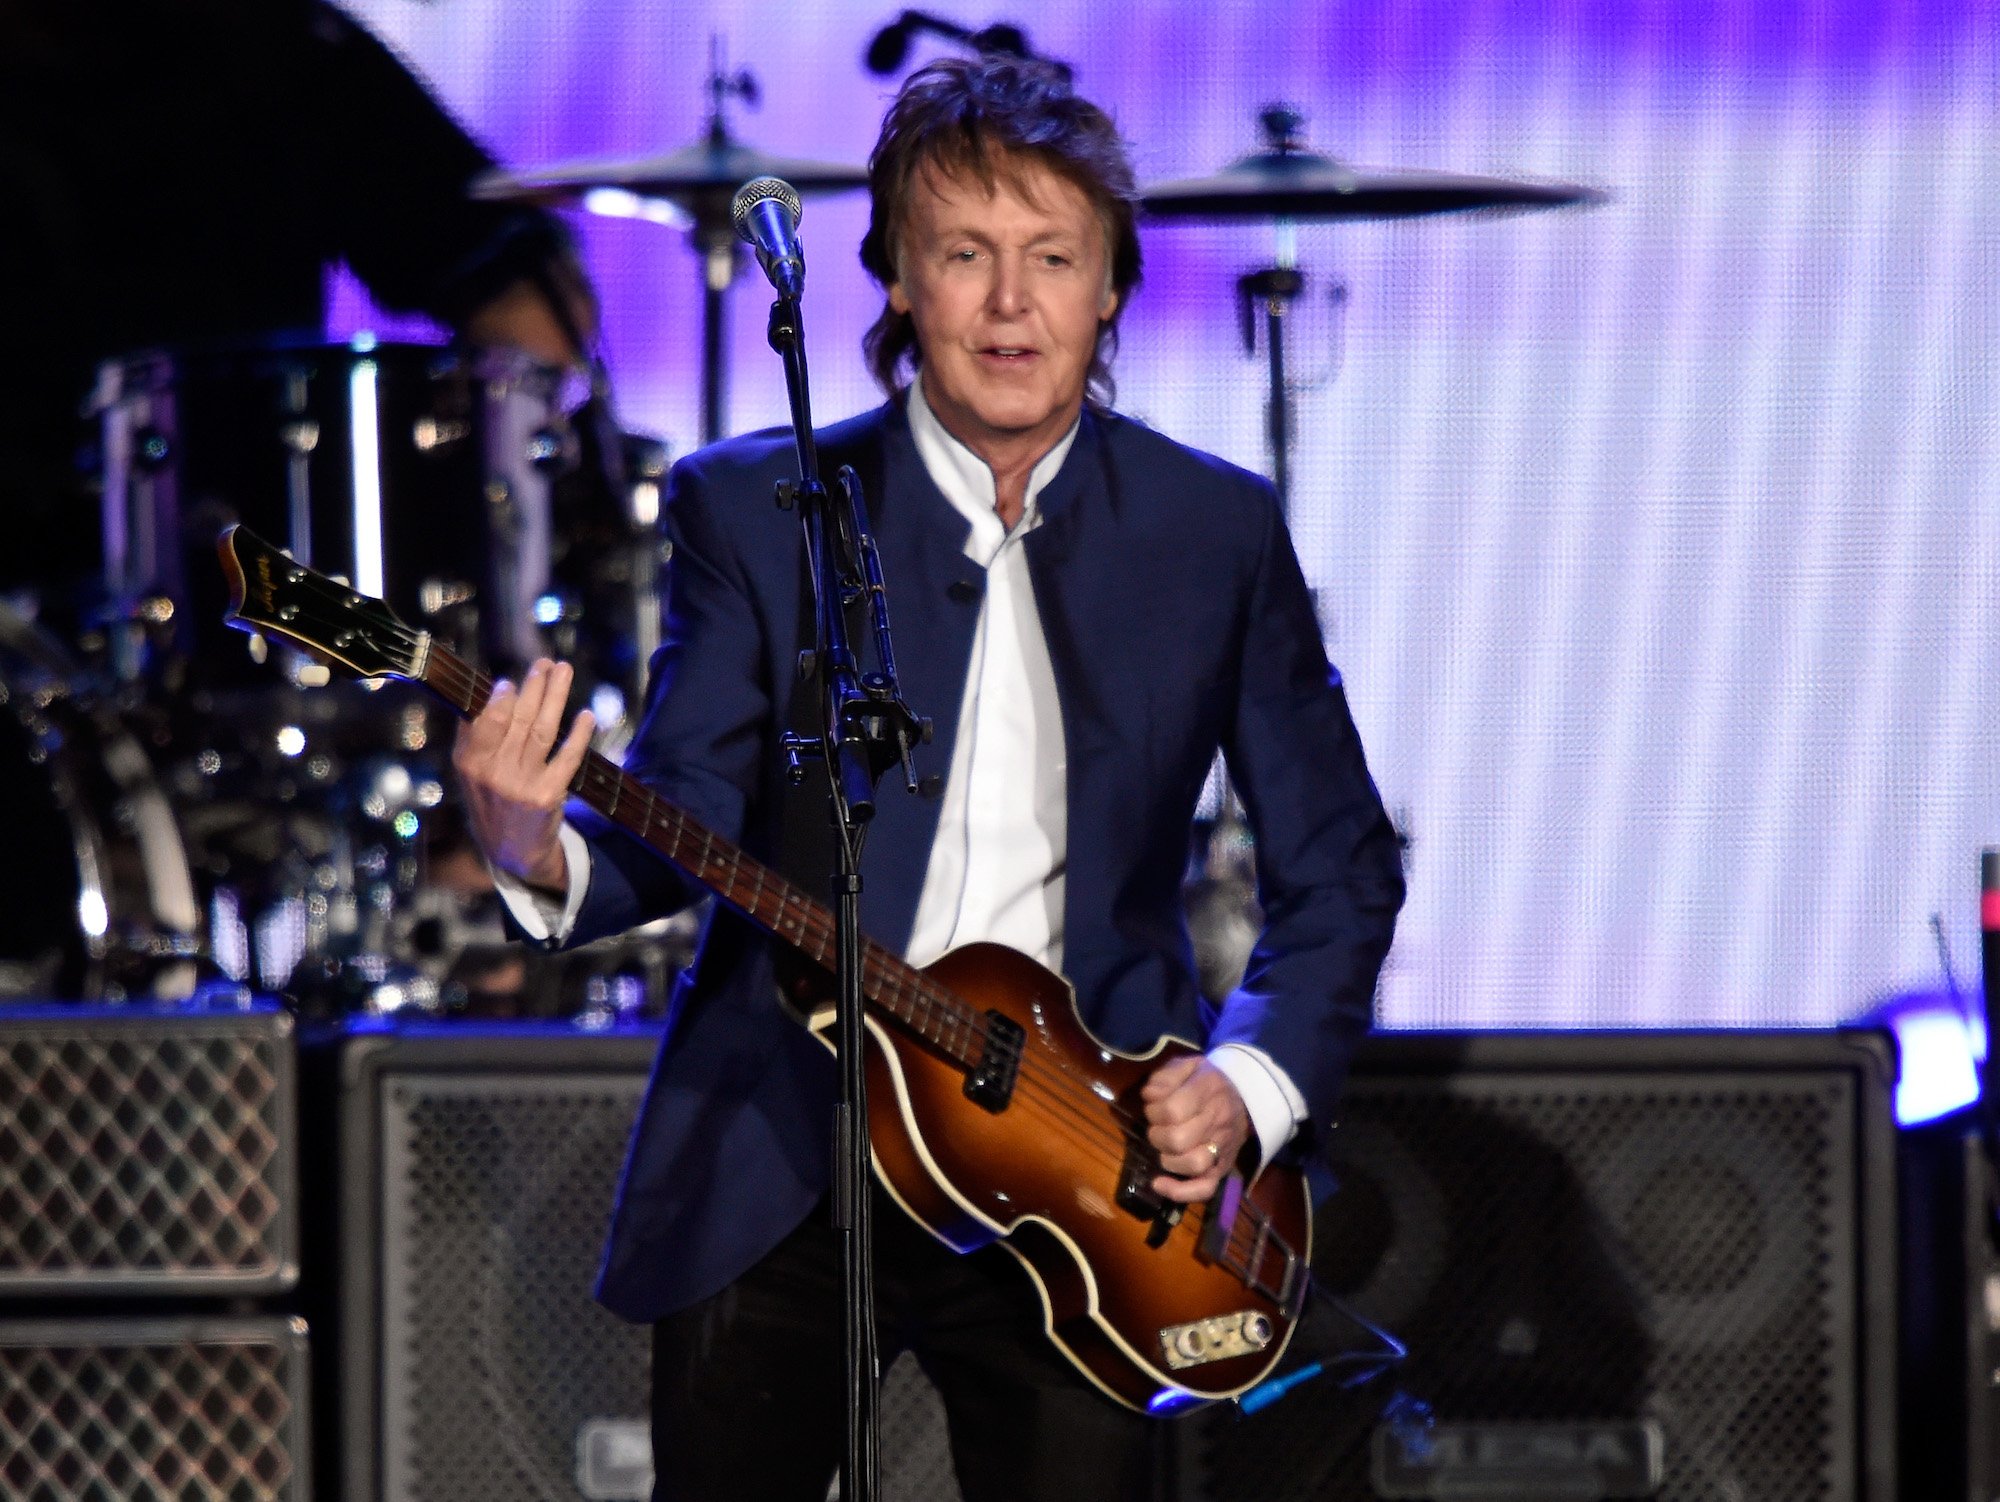 Paul McCartney performs at Desert Trip at The Empire Polo Club in Indio, California